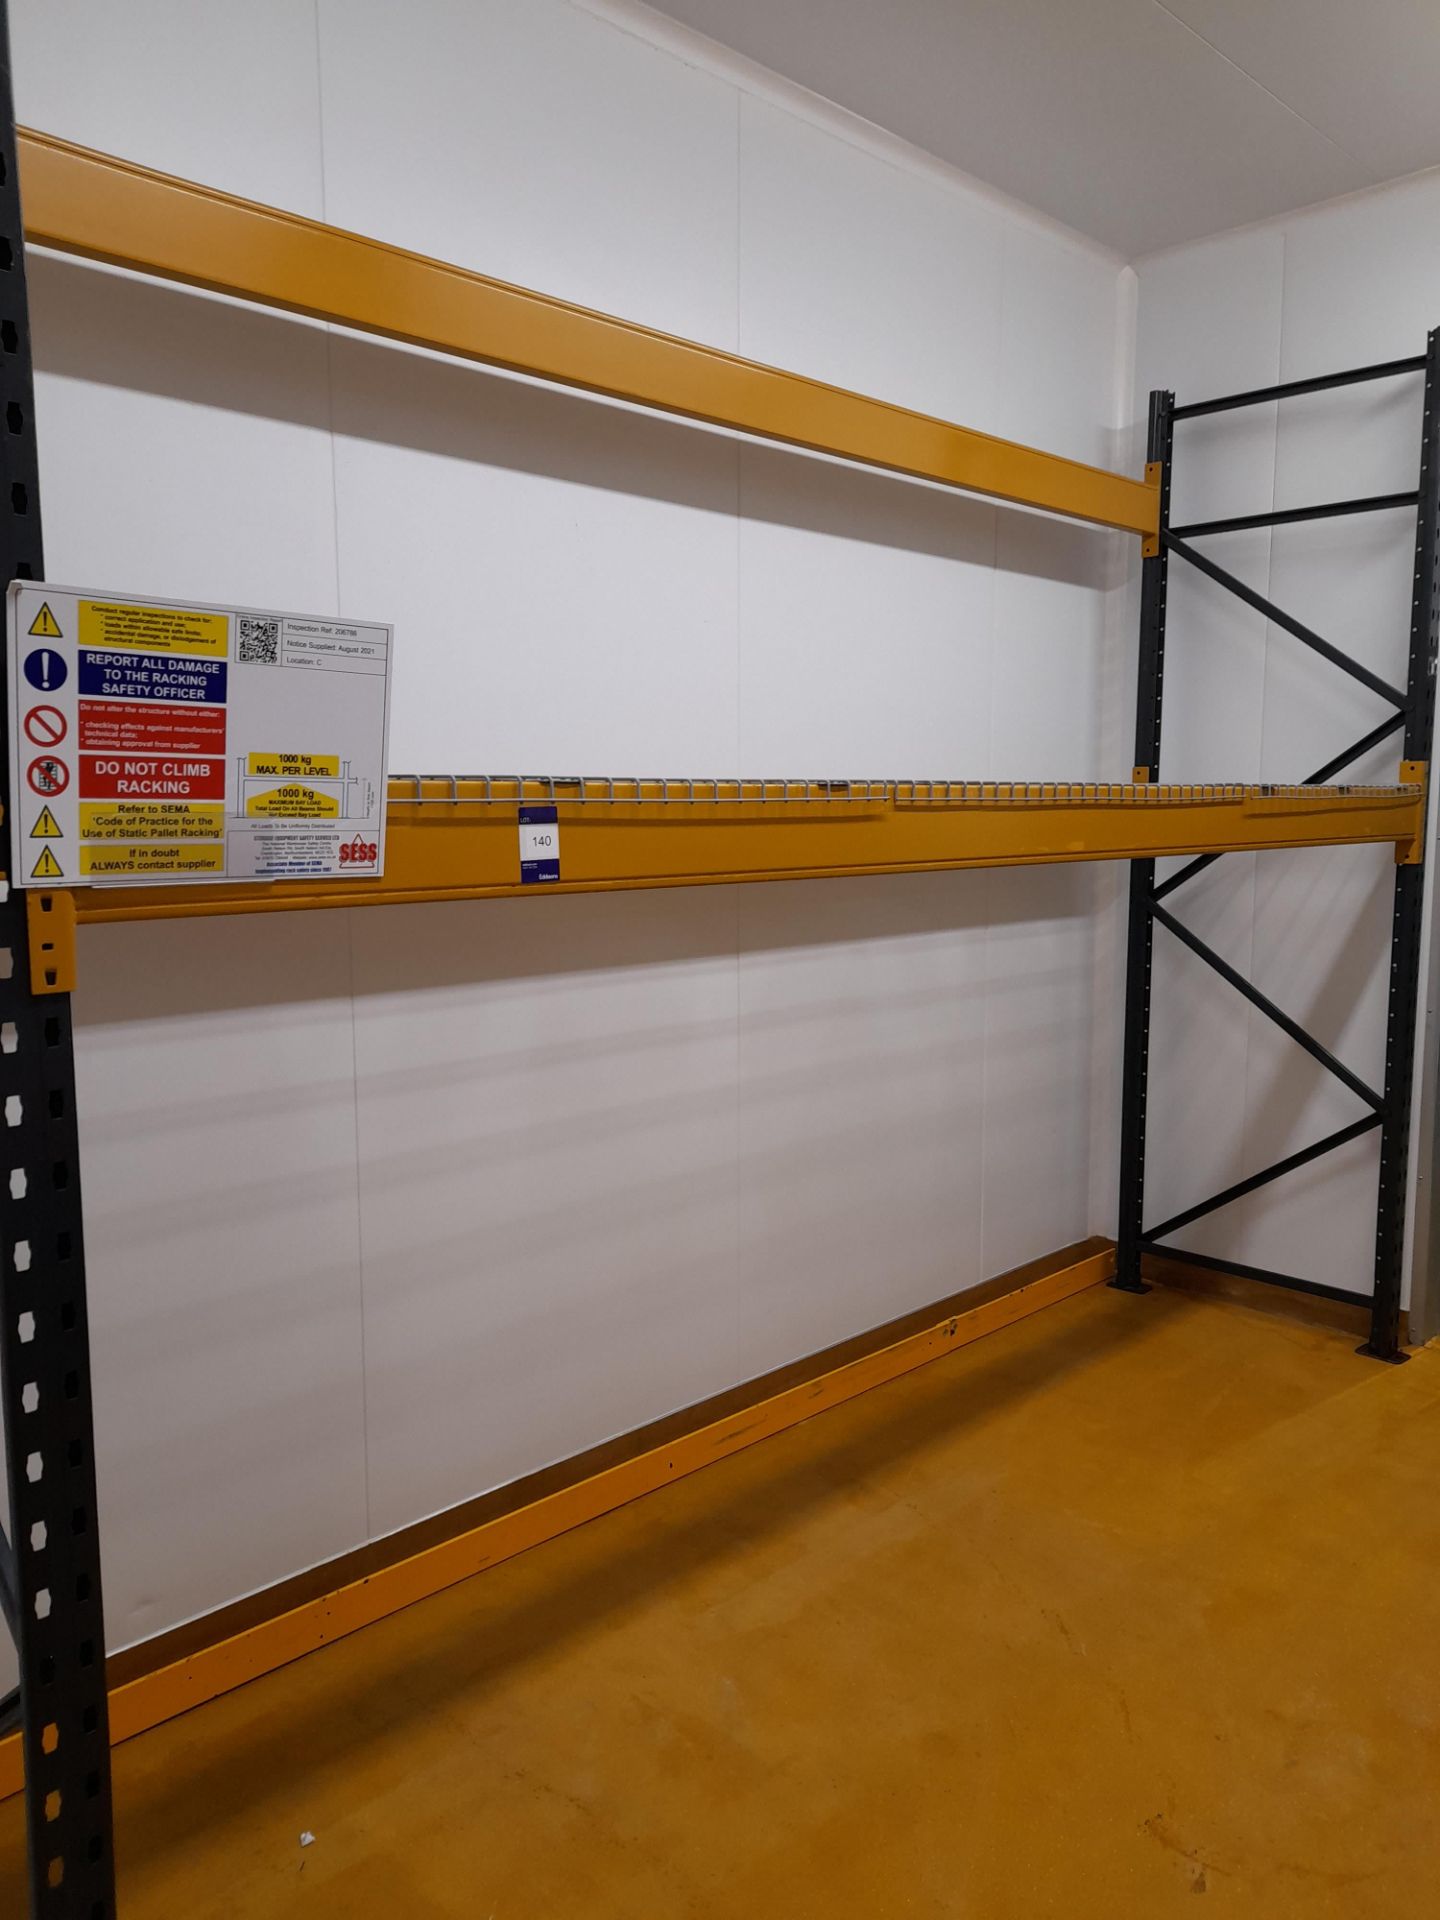 2 x Bays of Link 51M pallet racking, comprising 4 x uprights (3000mm), 6 x cross beams (3900mm) (